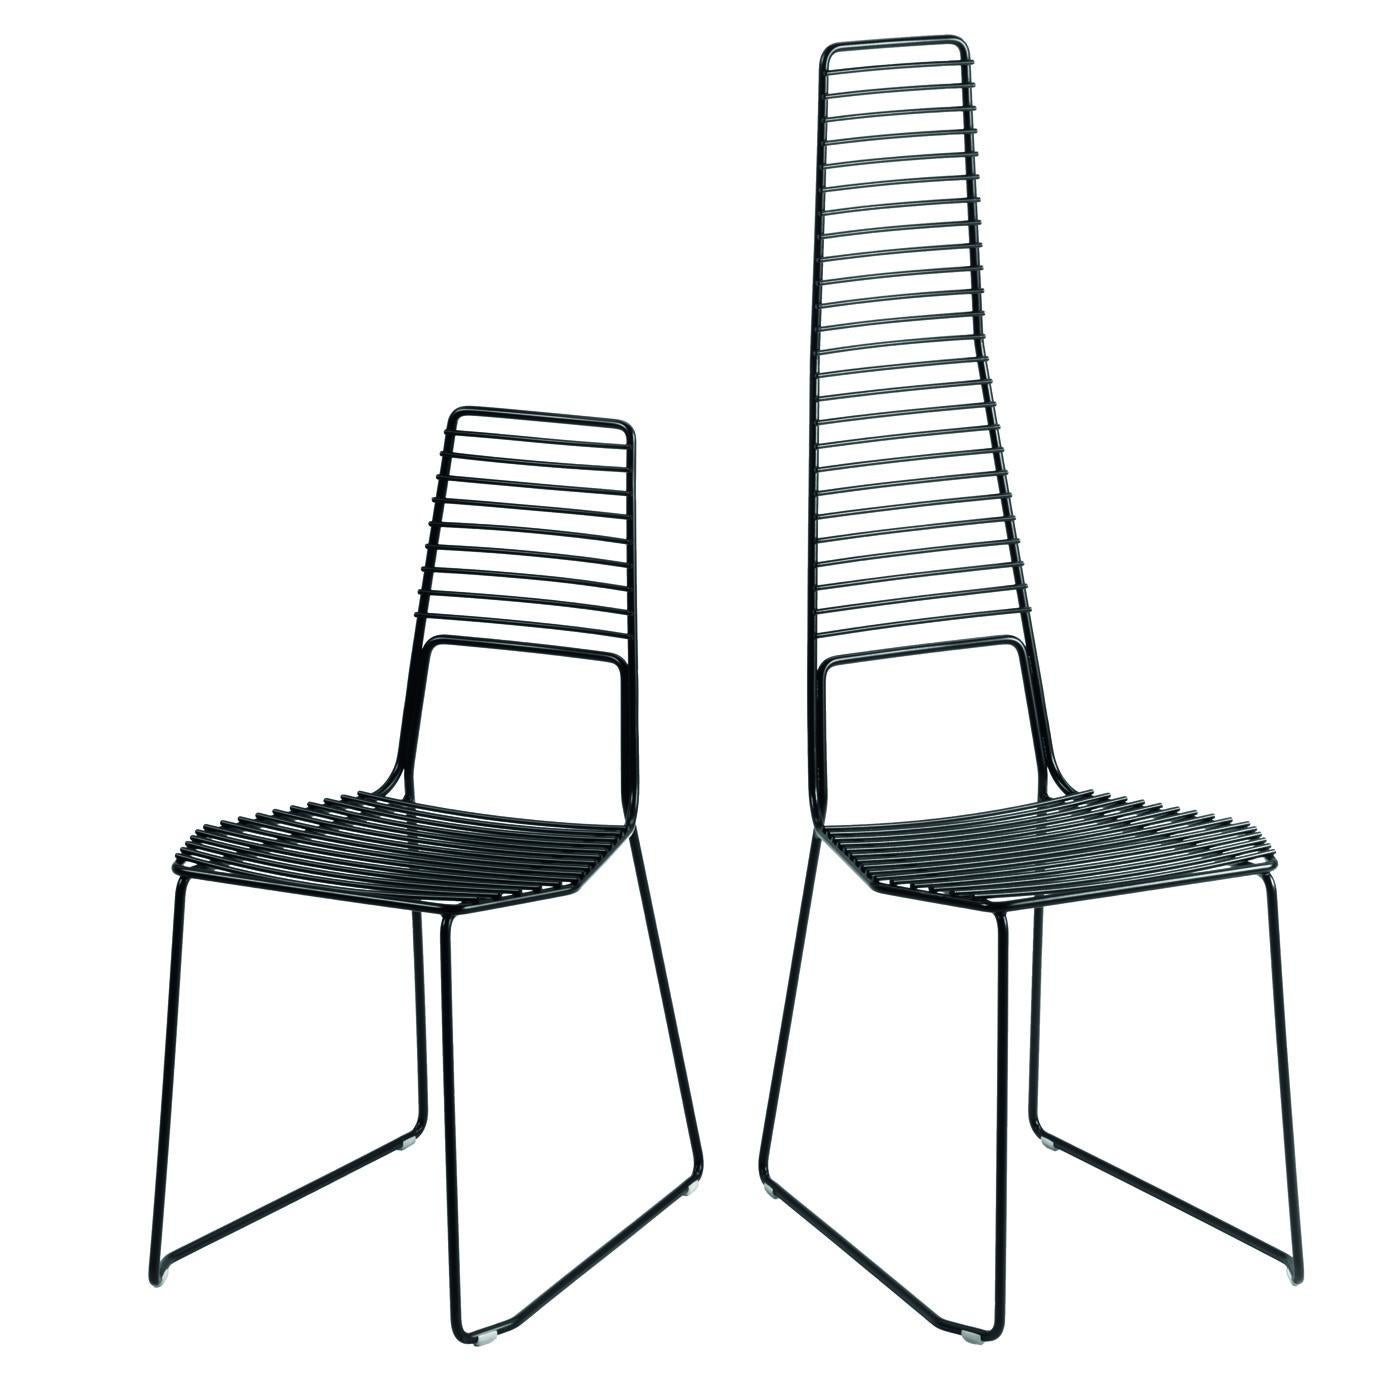 Part of the Alieno series designed by GamFratesi for Casamania, this set includes two chairs in embossed black-painted metal suitable for indoor and outdoor use. The simple shape plays with geometry to form an eye-catching silhouette with a strong